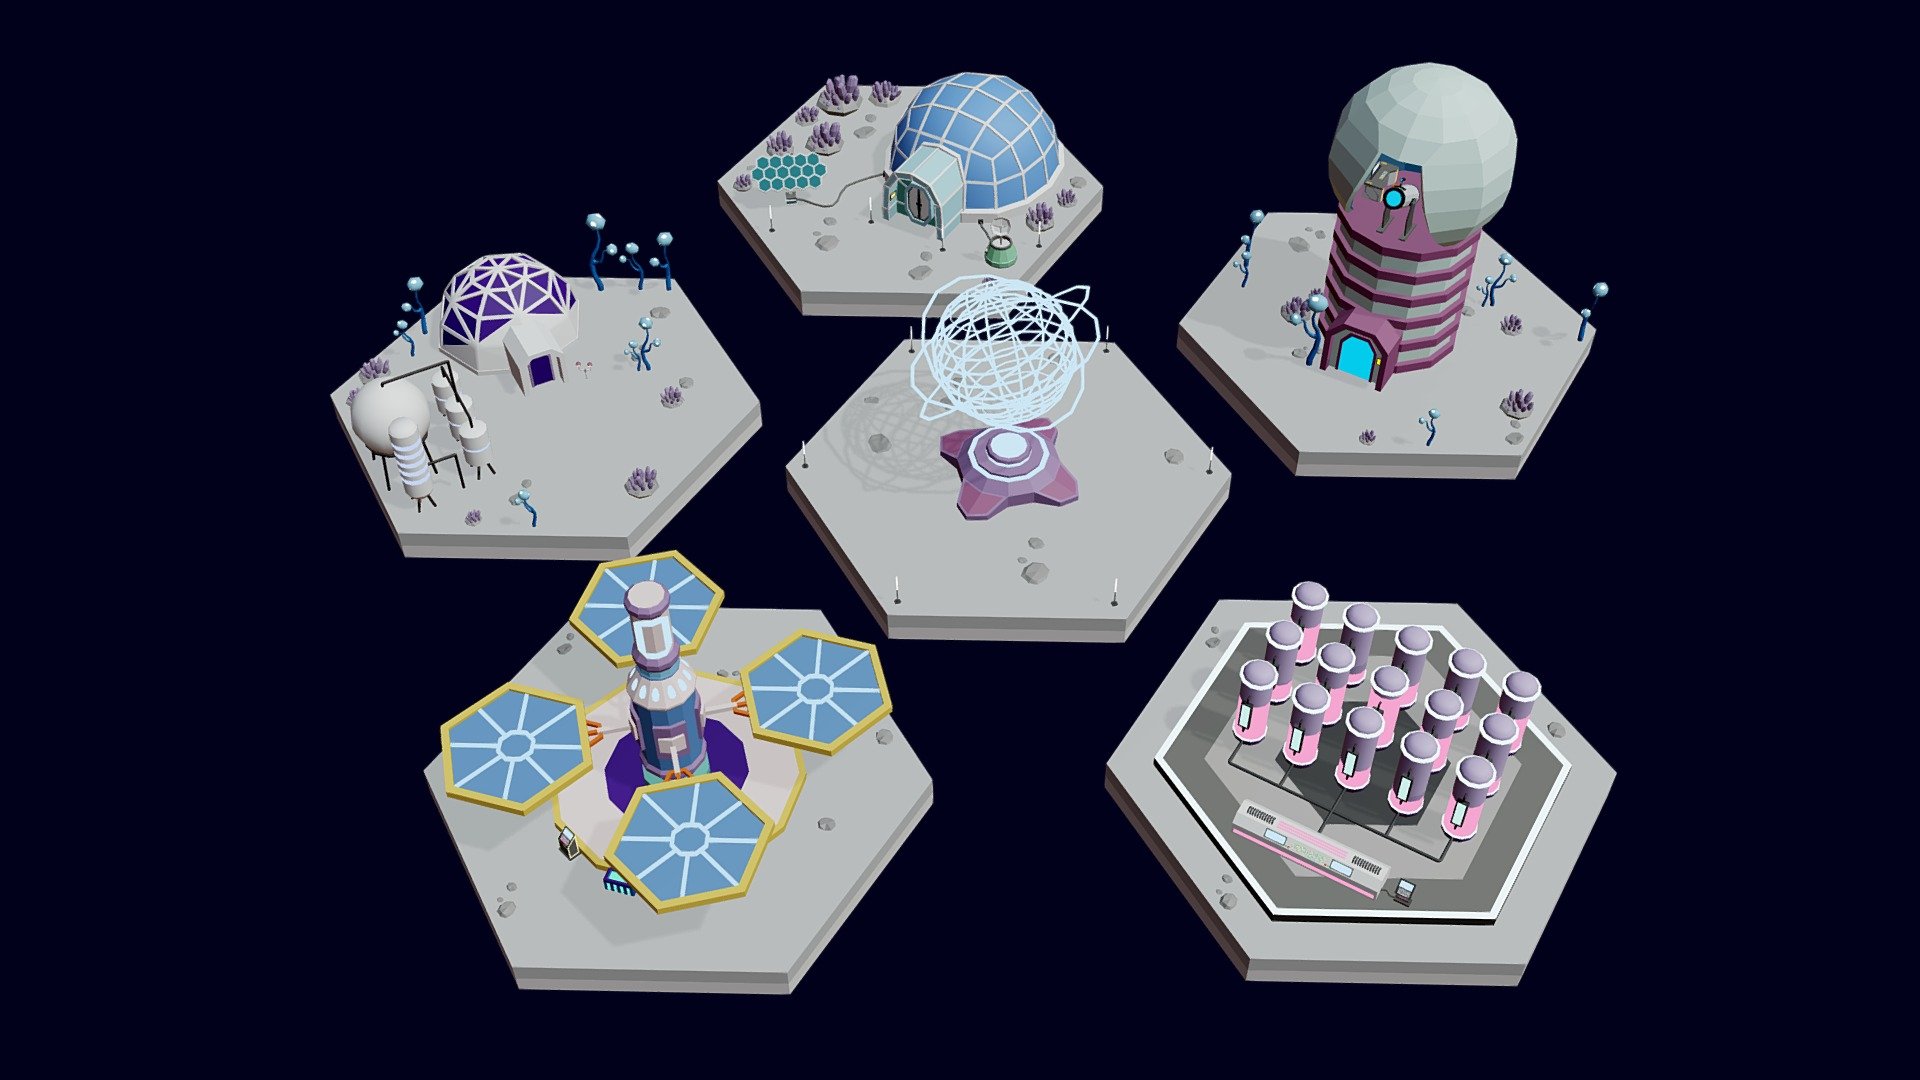 part of Low Poly Sci-Fi Tiles Lunar Zones download here

There are only 5 tiles out of 20 ready tiles Low Poly Sci-Fi Tiles Lunar Zones

You can easily create any map that suits you by simply connecting the tiles. You can scale objects/models to the size you need.

You can also use the created objects (stations / solar battery / antenna / crystals / rock / lamps / cylinders / robot cars / spaceships / buildings / installations / telescope / computers / monuments and much more!) by yourself to create your own tiles/unique environments! - Low Poly Sci-Fi Tiles Lunar Zones vol. 2 - 3D model by Mnostva 3d model